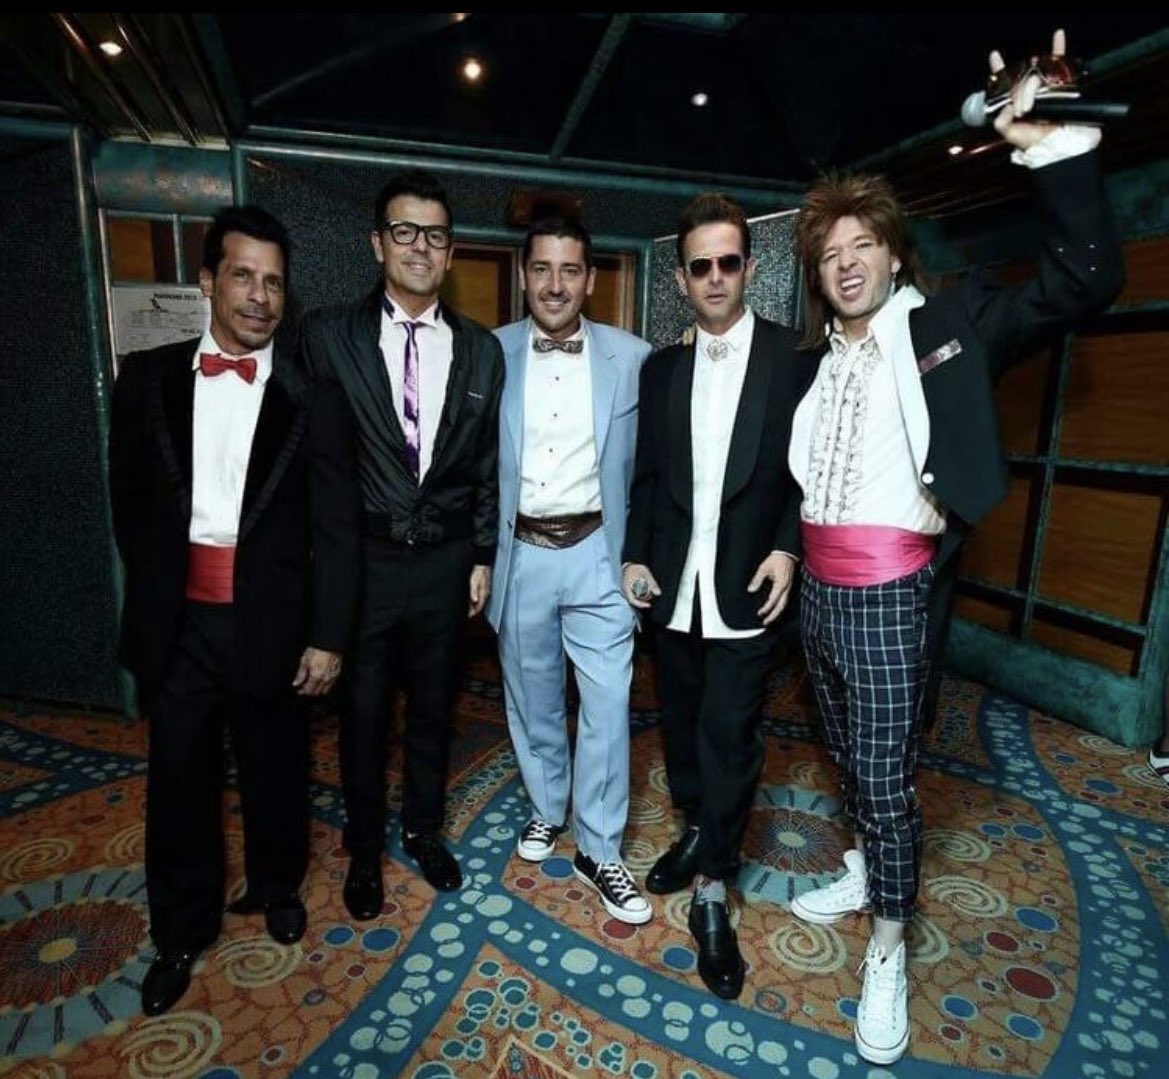 So, it’s officially an 80’s Prom now!  But go and have fun in whatever you planned…it’ll be ok in the end!!!  No stress #BlockCon @NKOTB #NKOTB #NewKidsontheBlock @dannywood #JordanKnight @JonathanRKnight @joeymcintyre @DonnieWahlberg #Prom #BHFam #BHFamily #Blockhead #BHLove